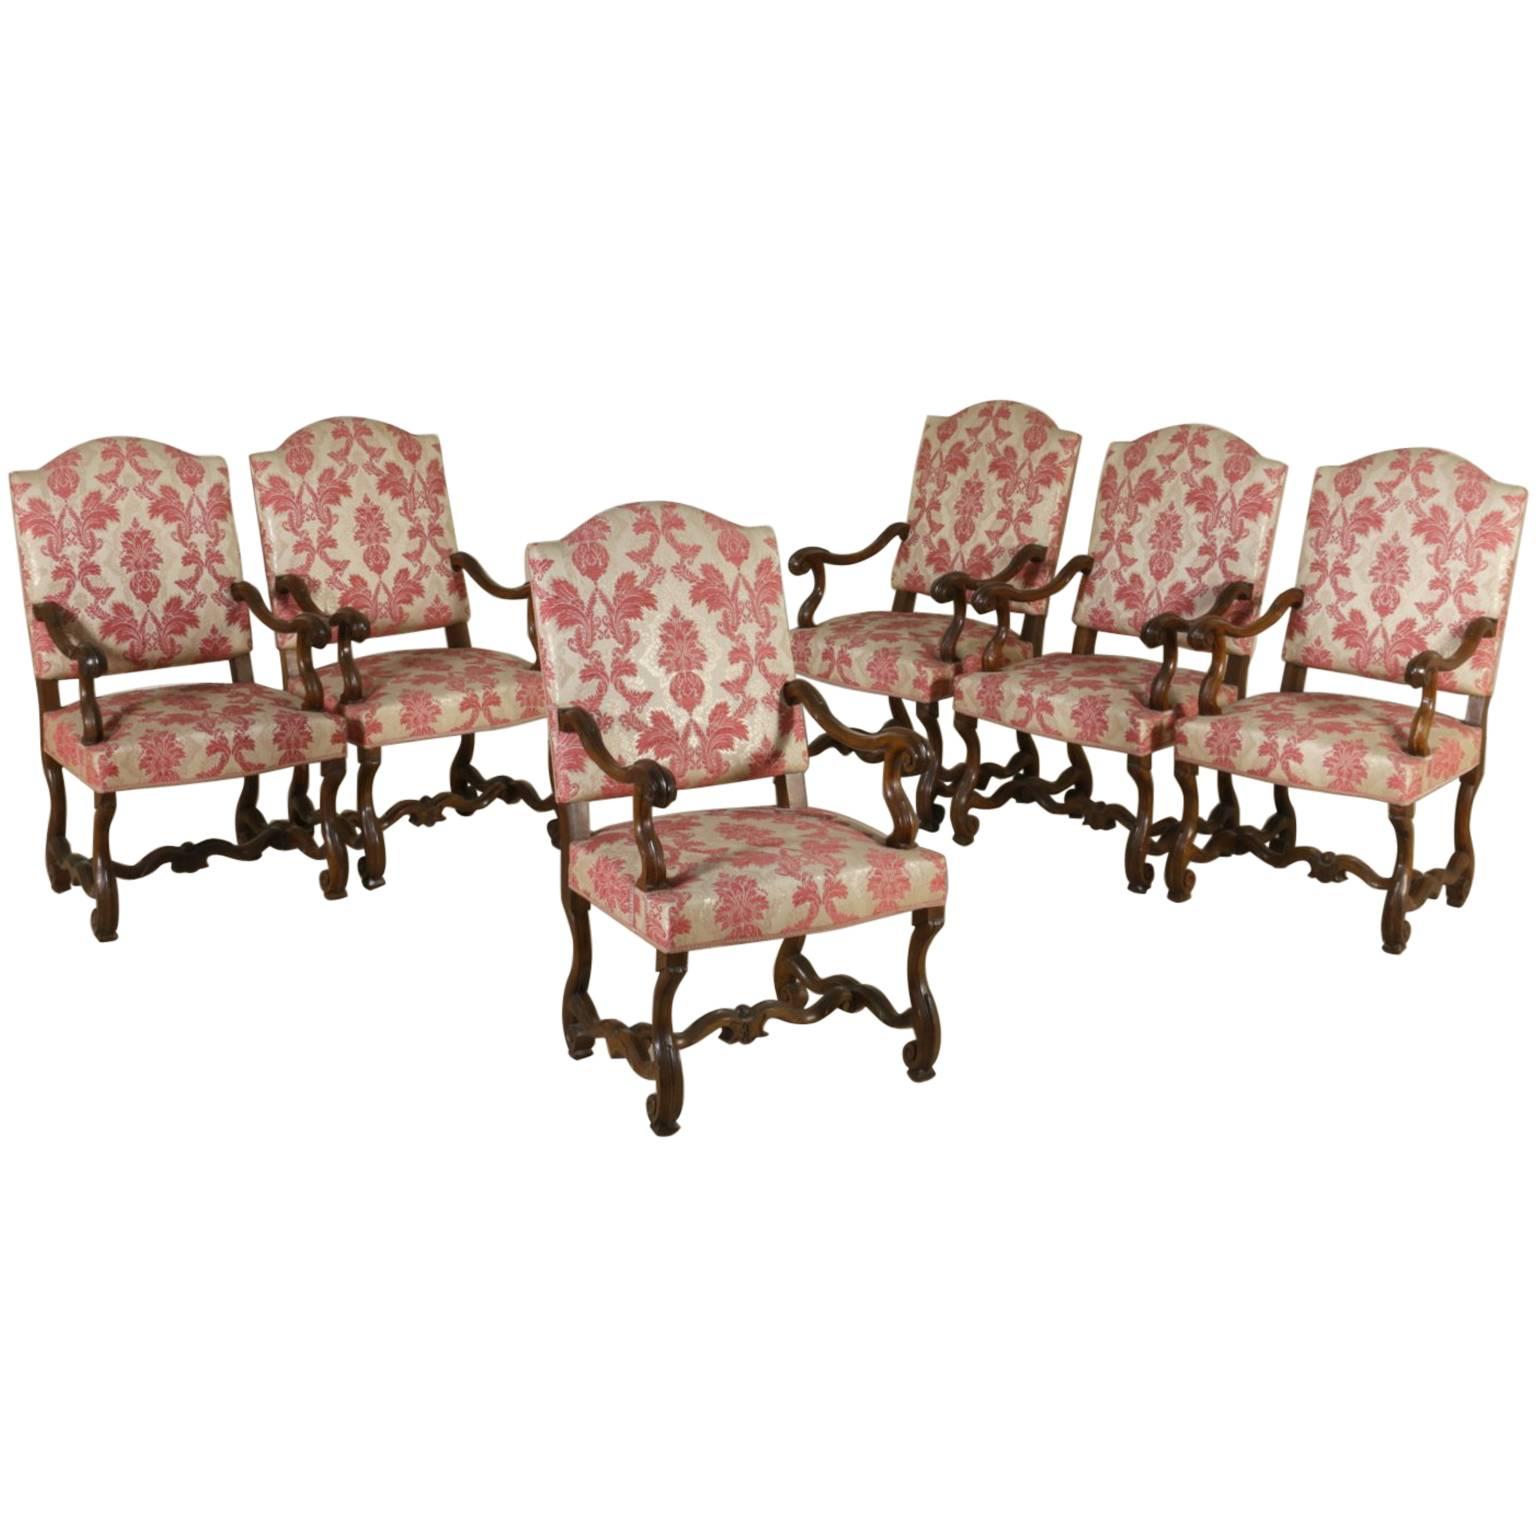 Important Six Armchairs Group Liguria, Italy, First Quarter of the 18th Century